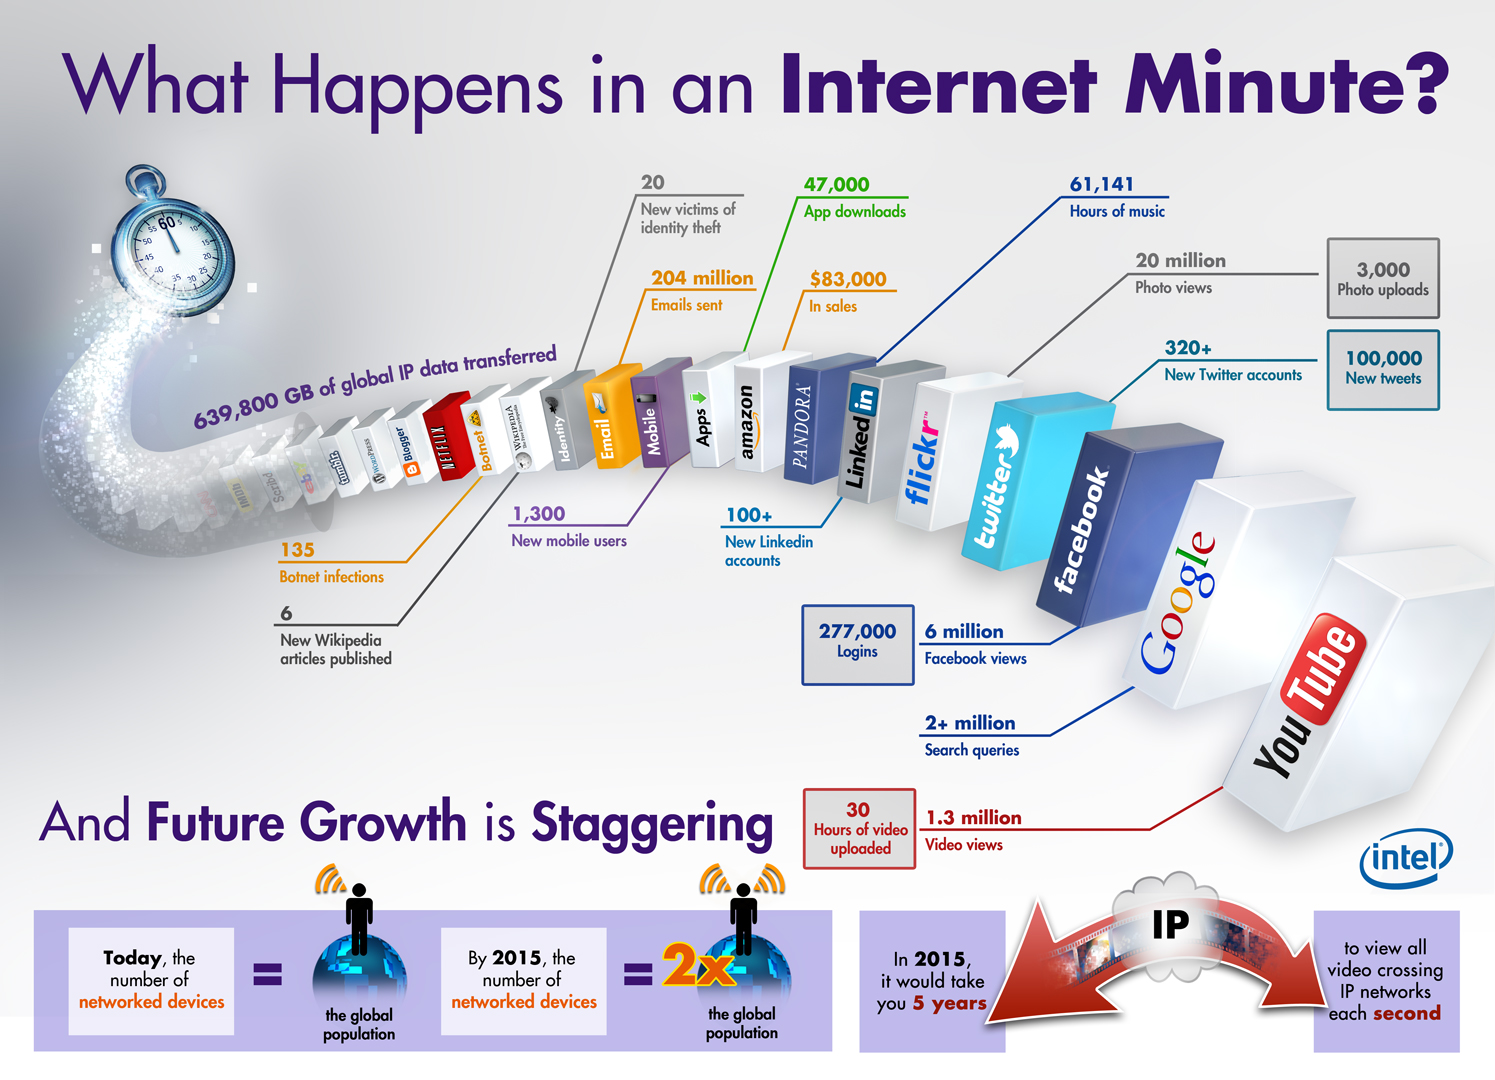 What happens in a minute on the internet?